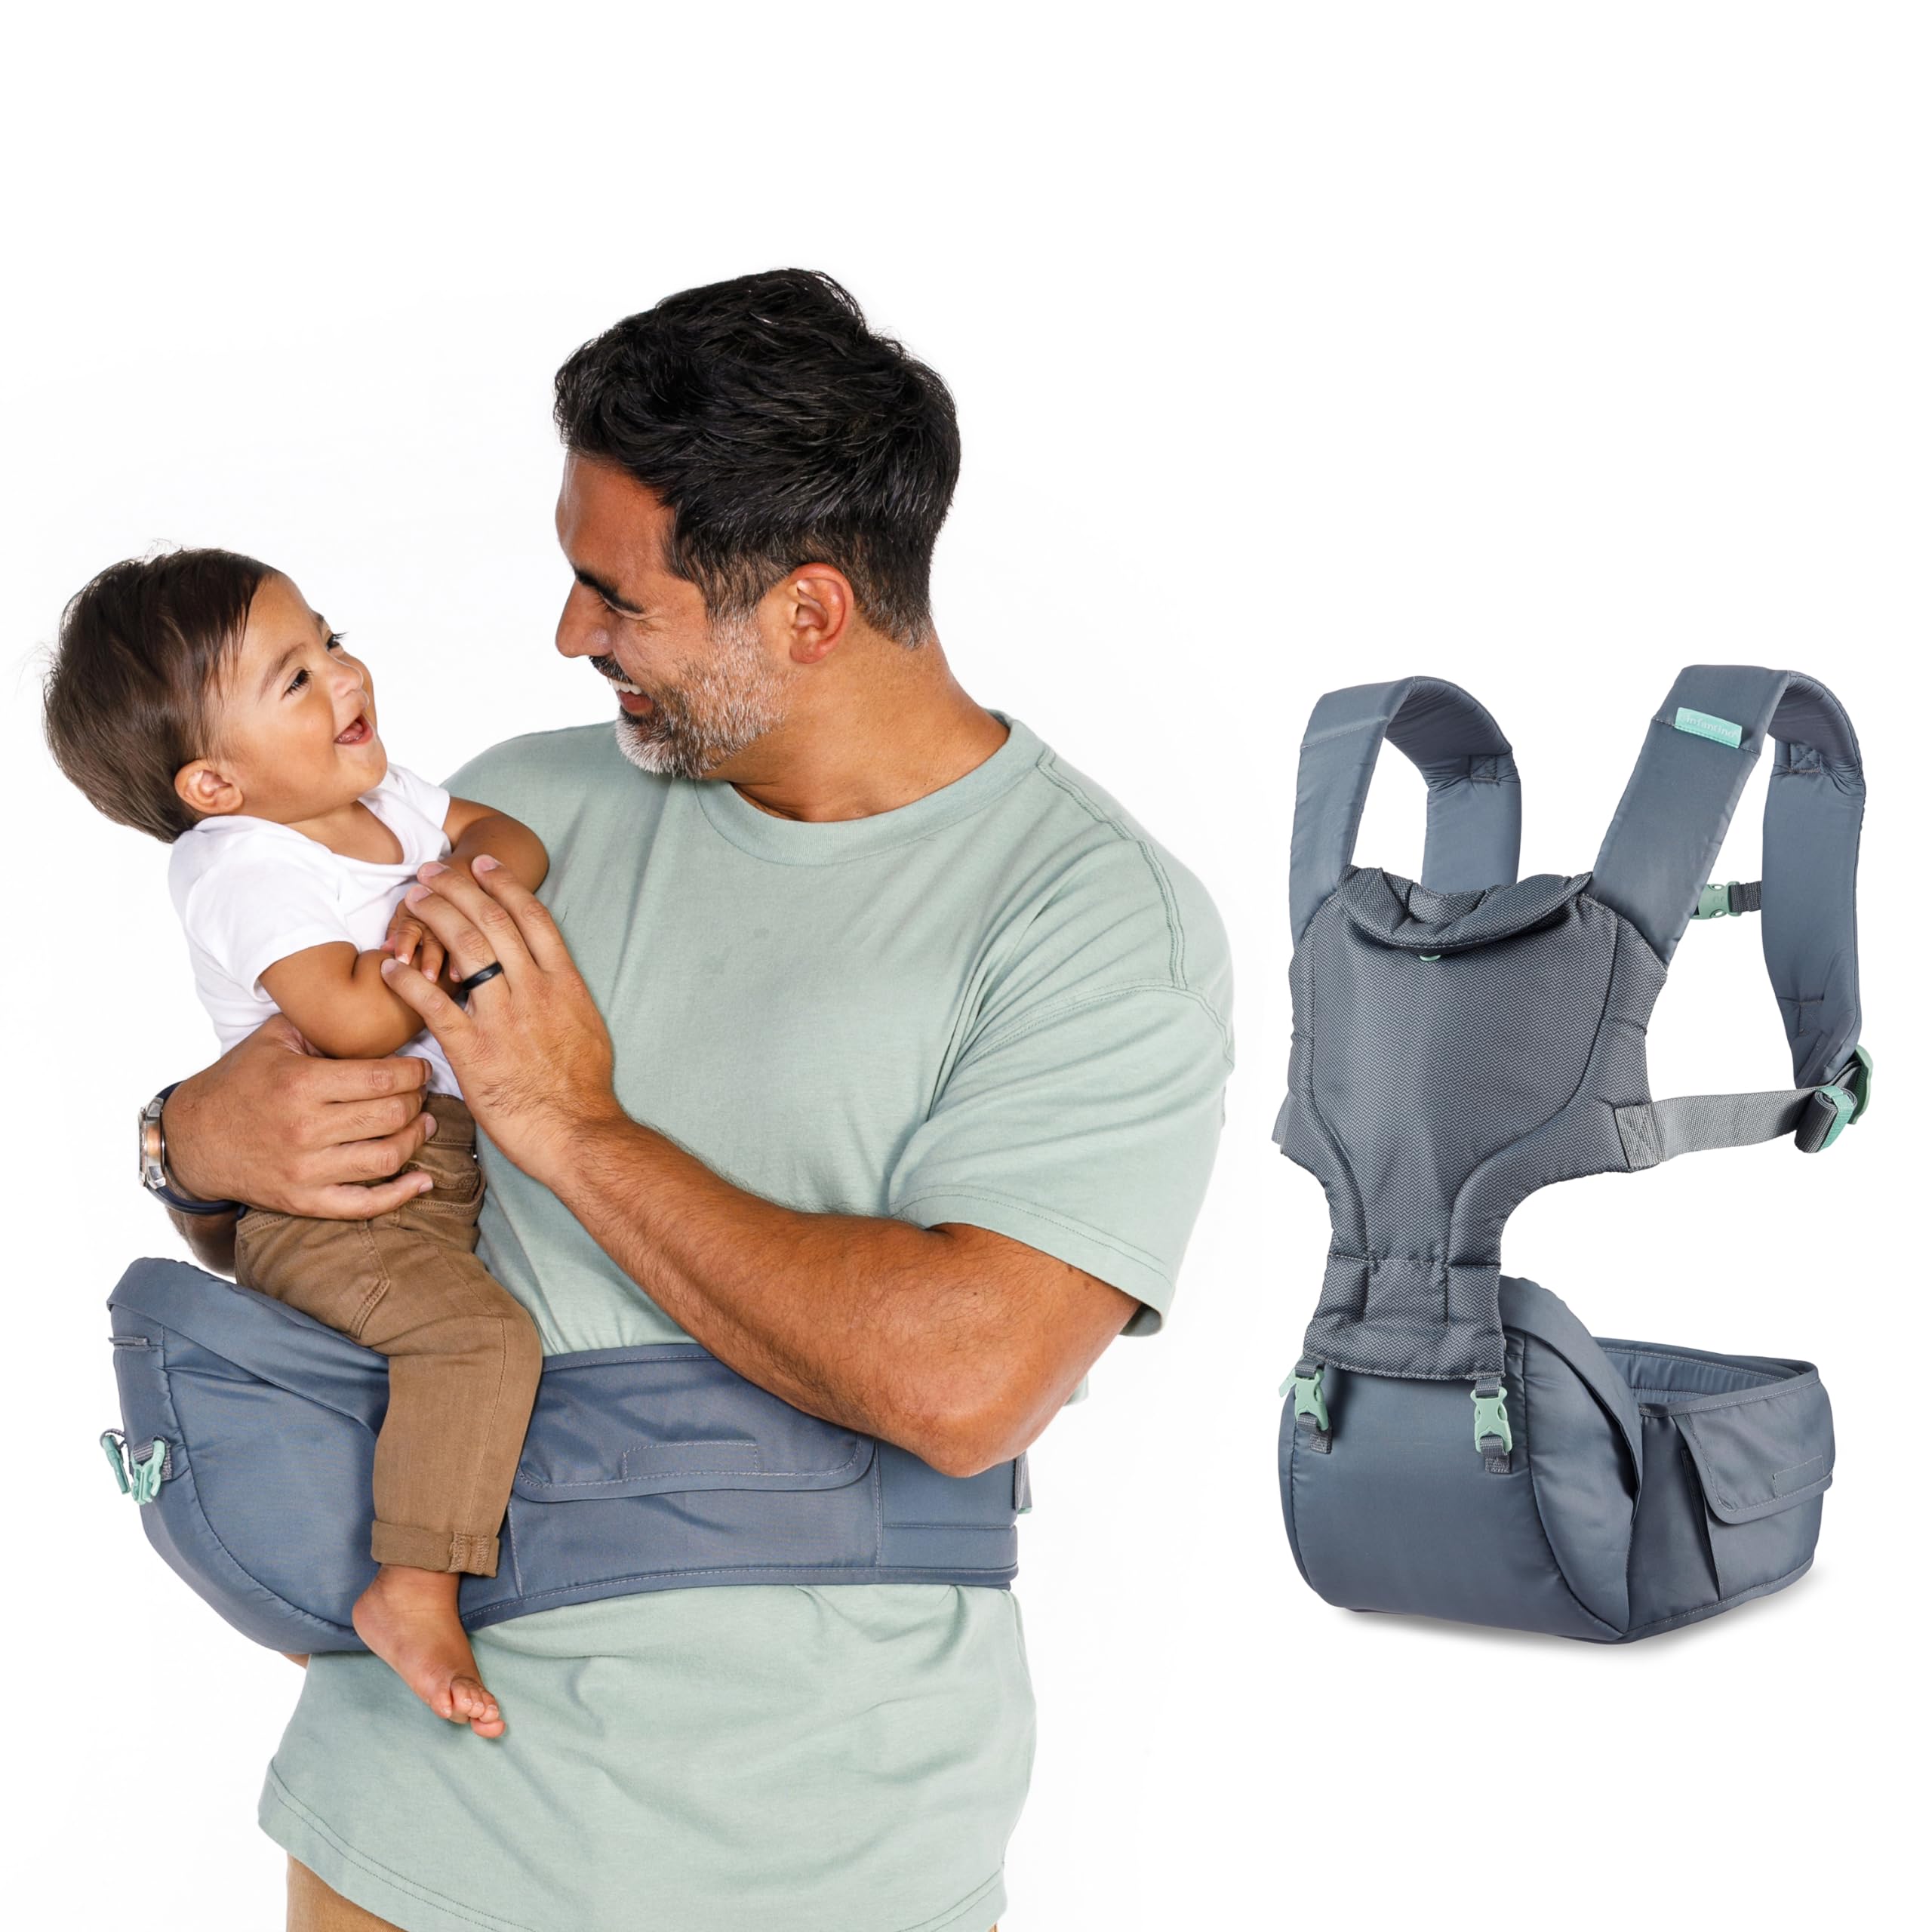 Infantino Hip Rider Plus 5-in-1 Hip Seat Carrier - 2 Easy-to-Use Ergonomic Carriers in 1 for Babies and Toddlers with Storage Pocket